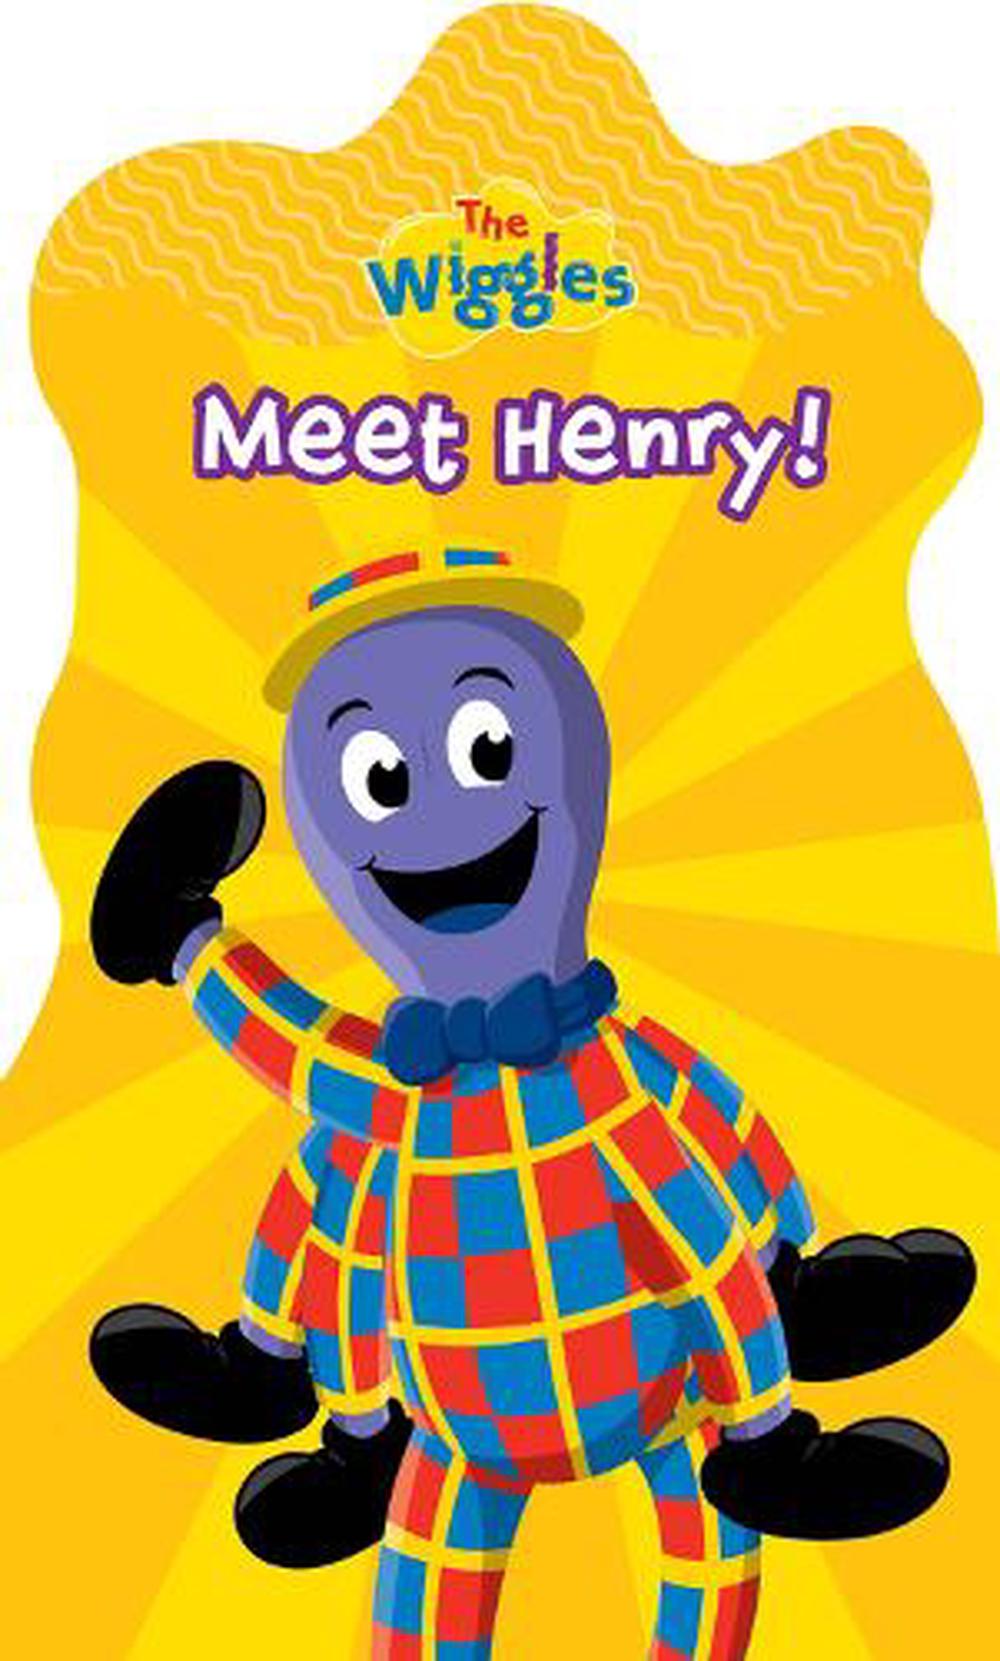 The Wiggles Meet Henry By The Wiggles Board Books 9781922857613